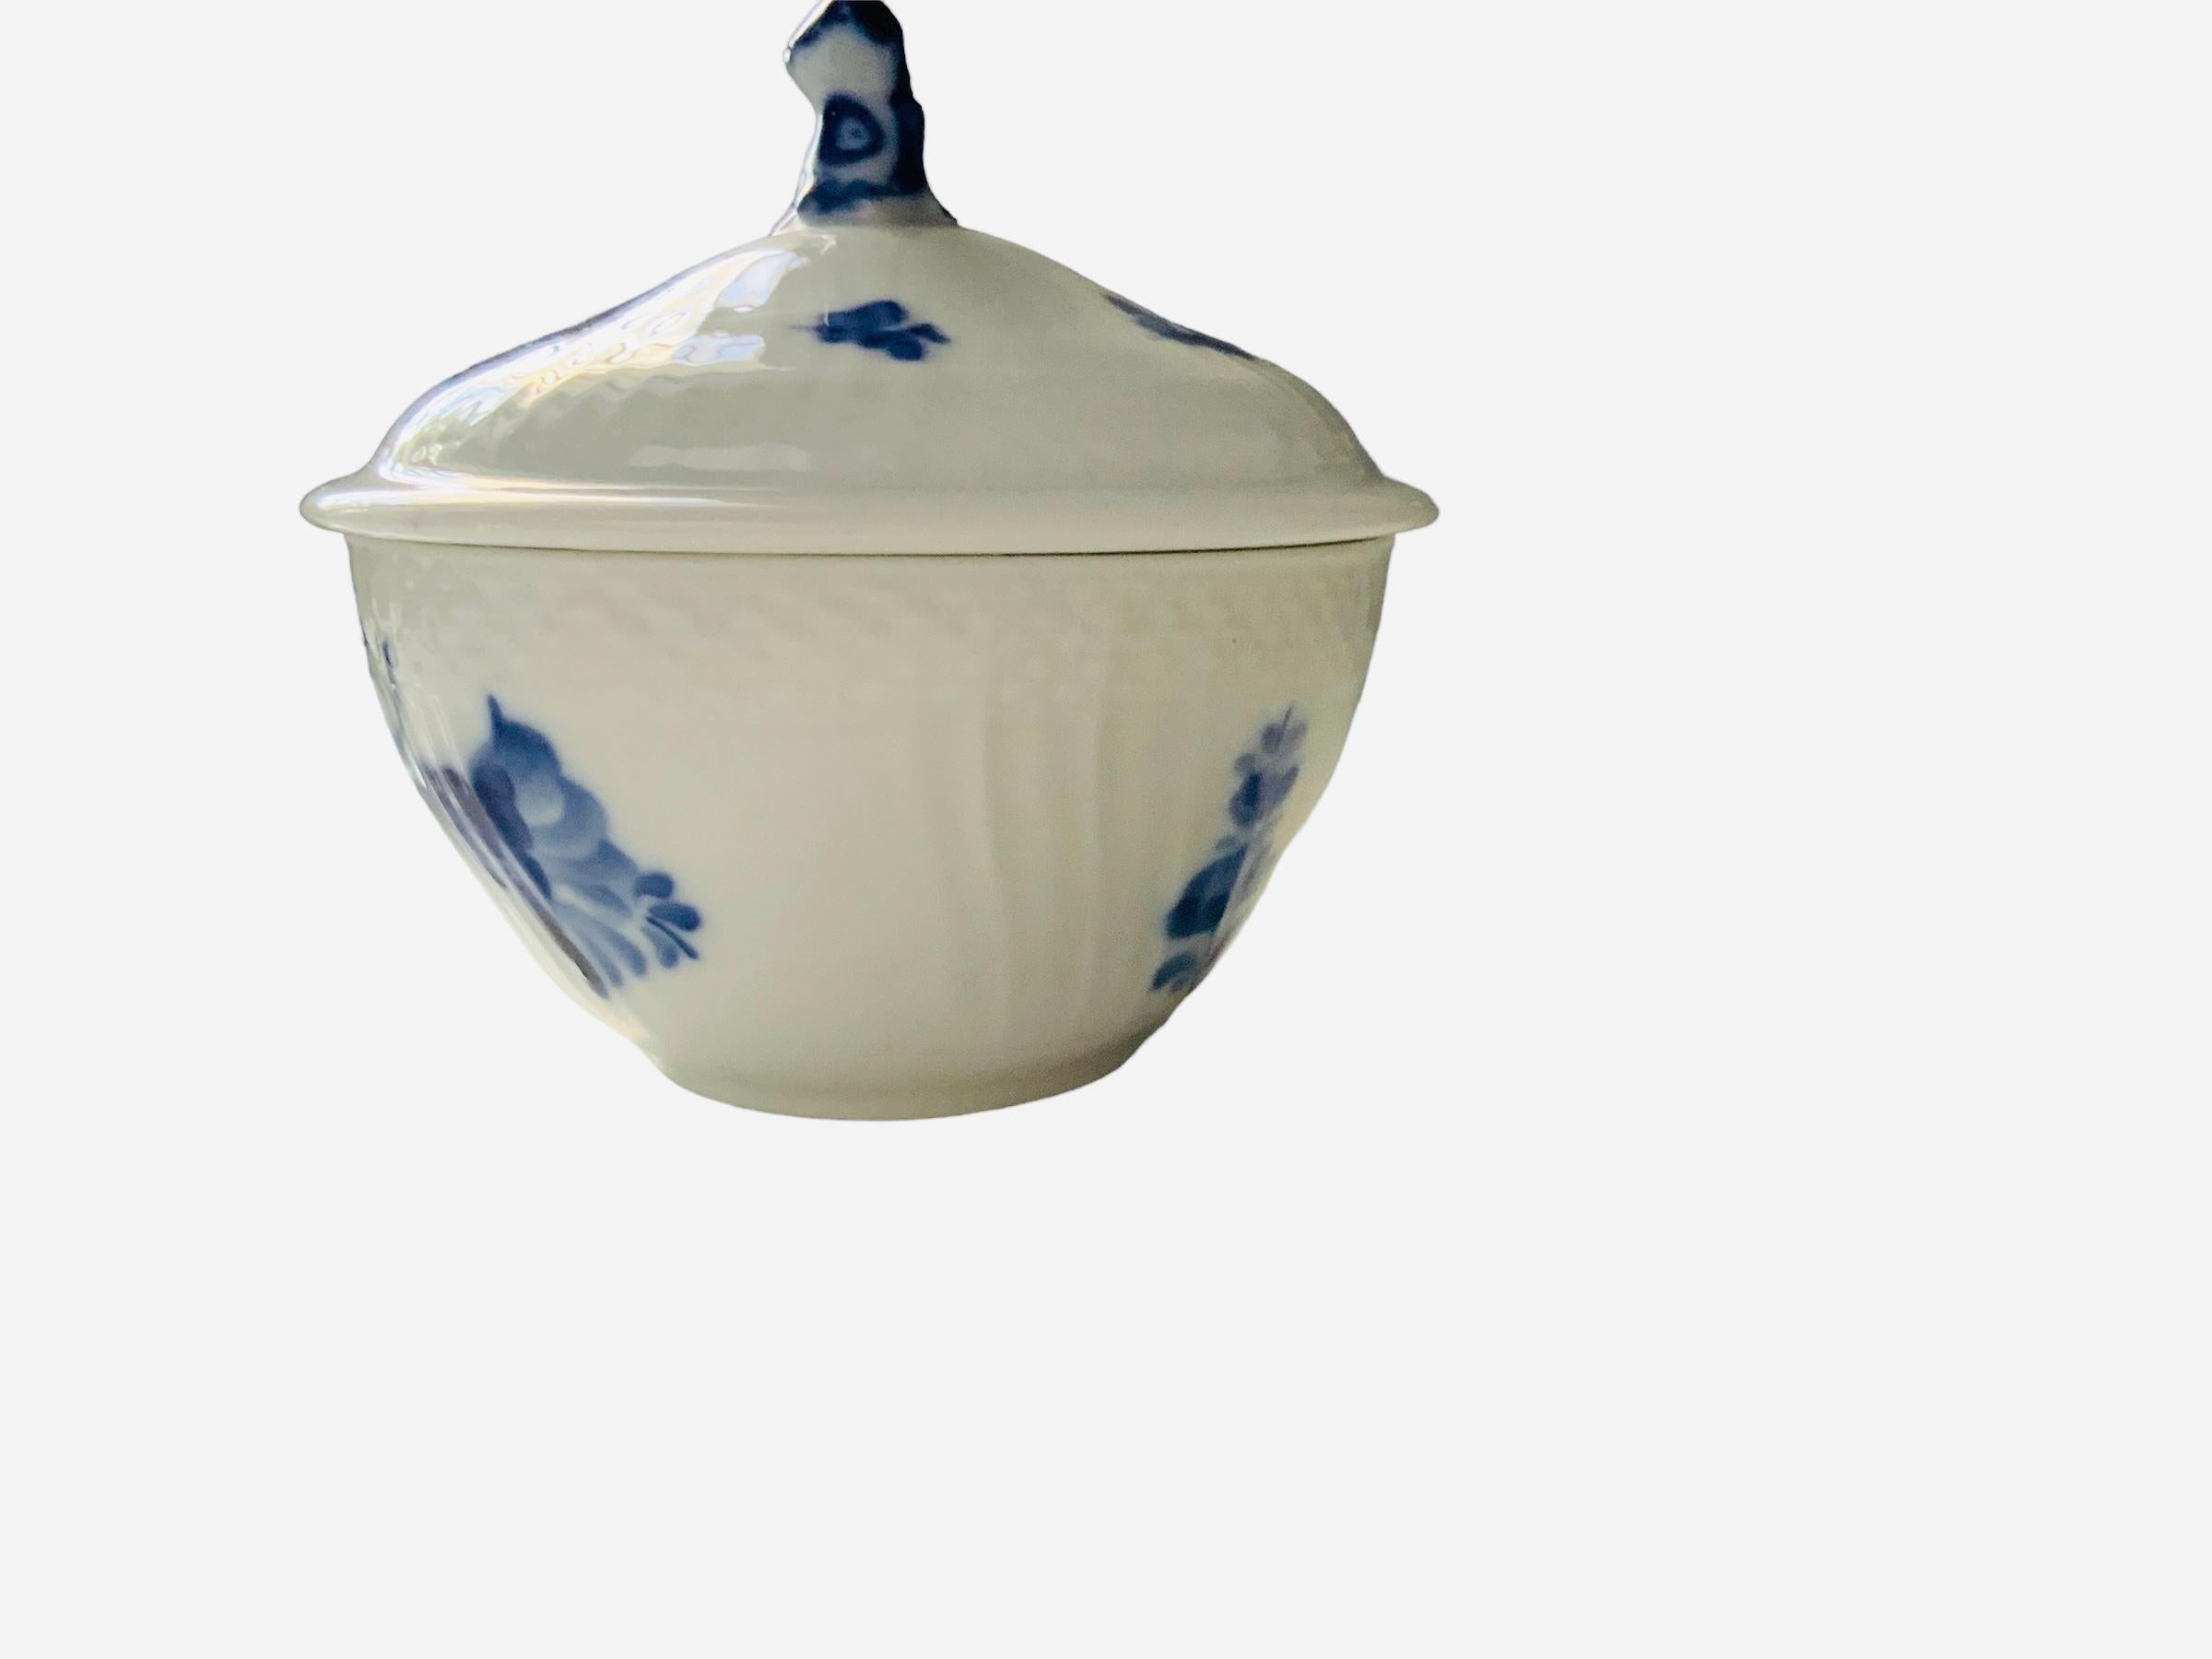 This is a Royal Copenhagen porcelain sugar bowl with lid. It has a white background and it is hand painted with a blue bouquet of flowers in the center and single branches around the body and lid. The outside border of the upper top bowl and lid are